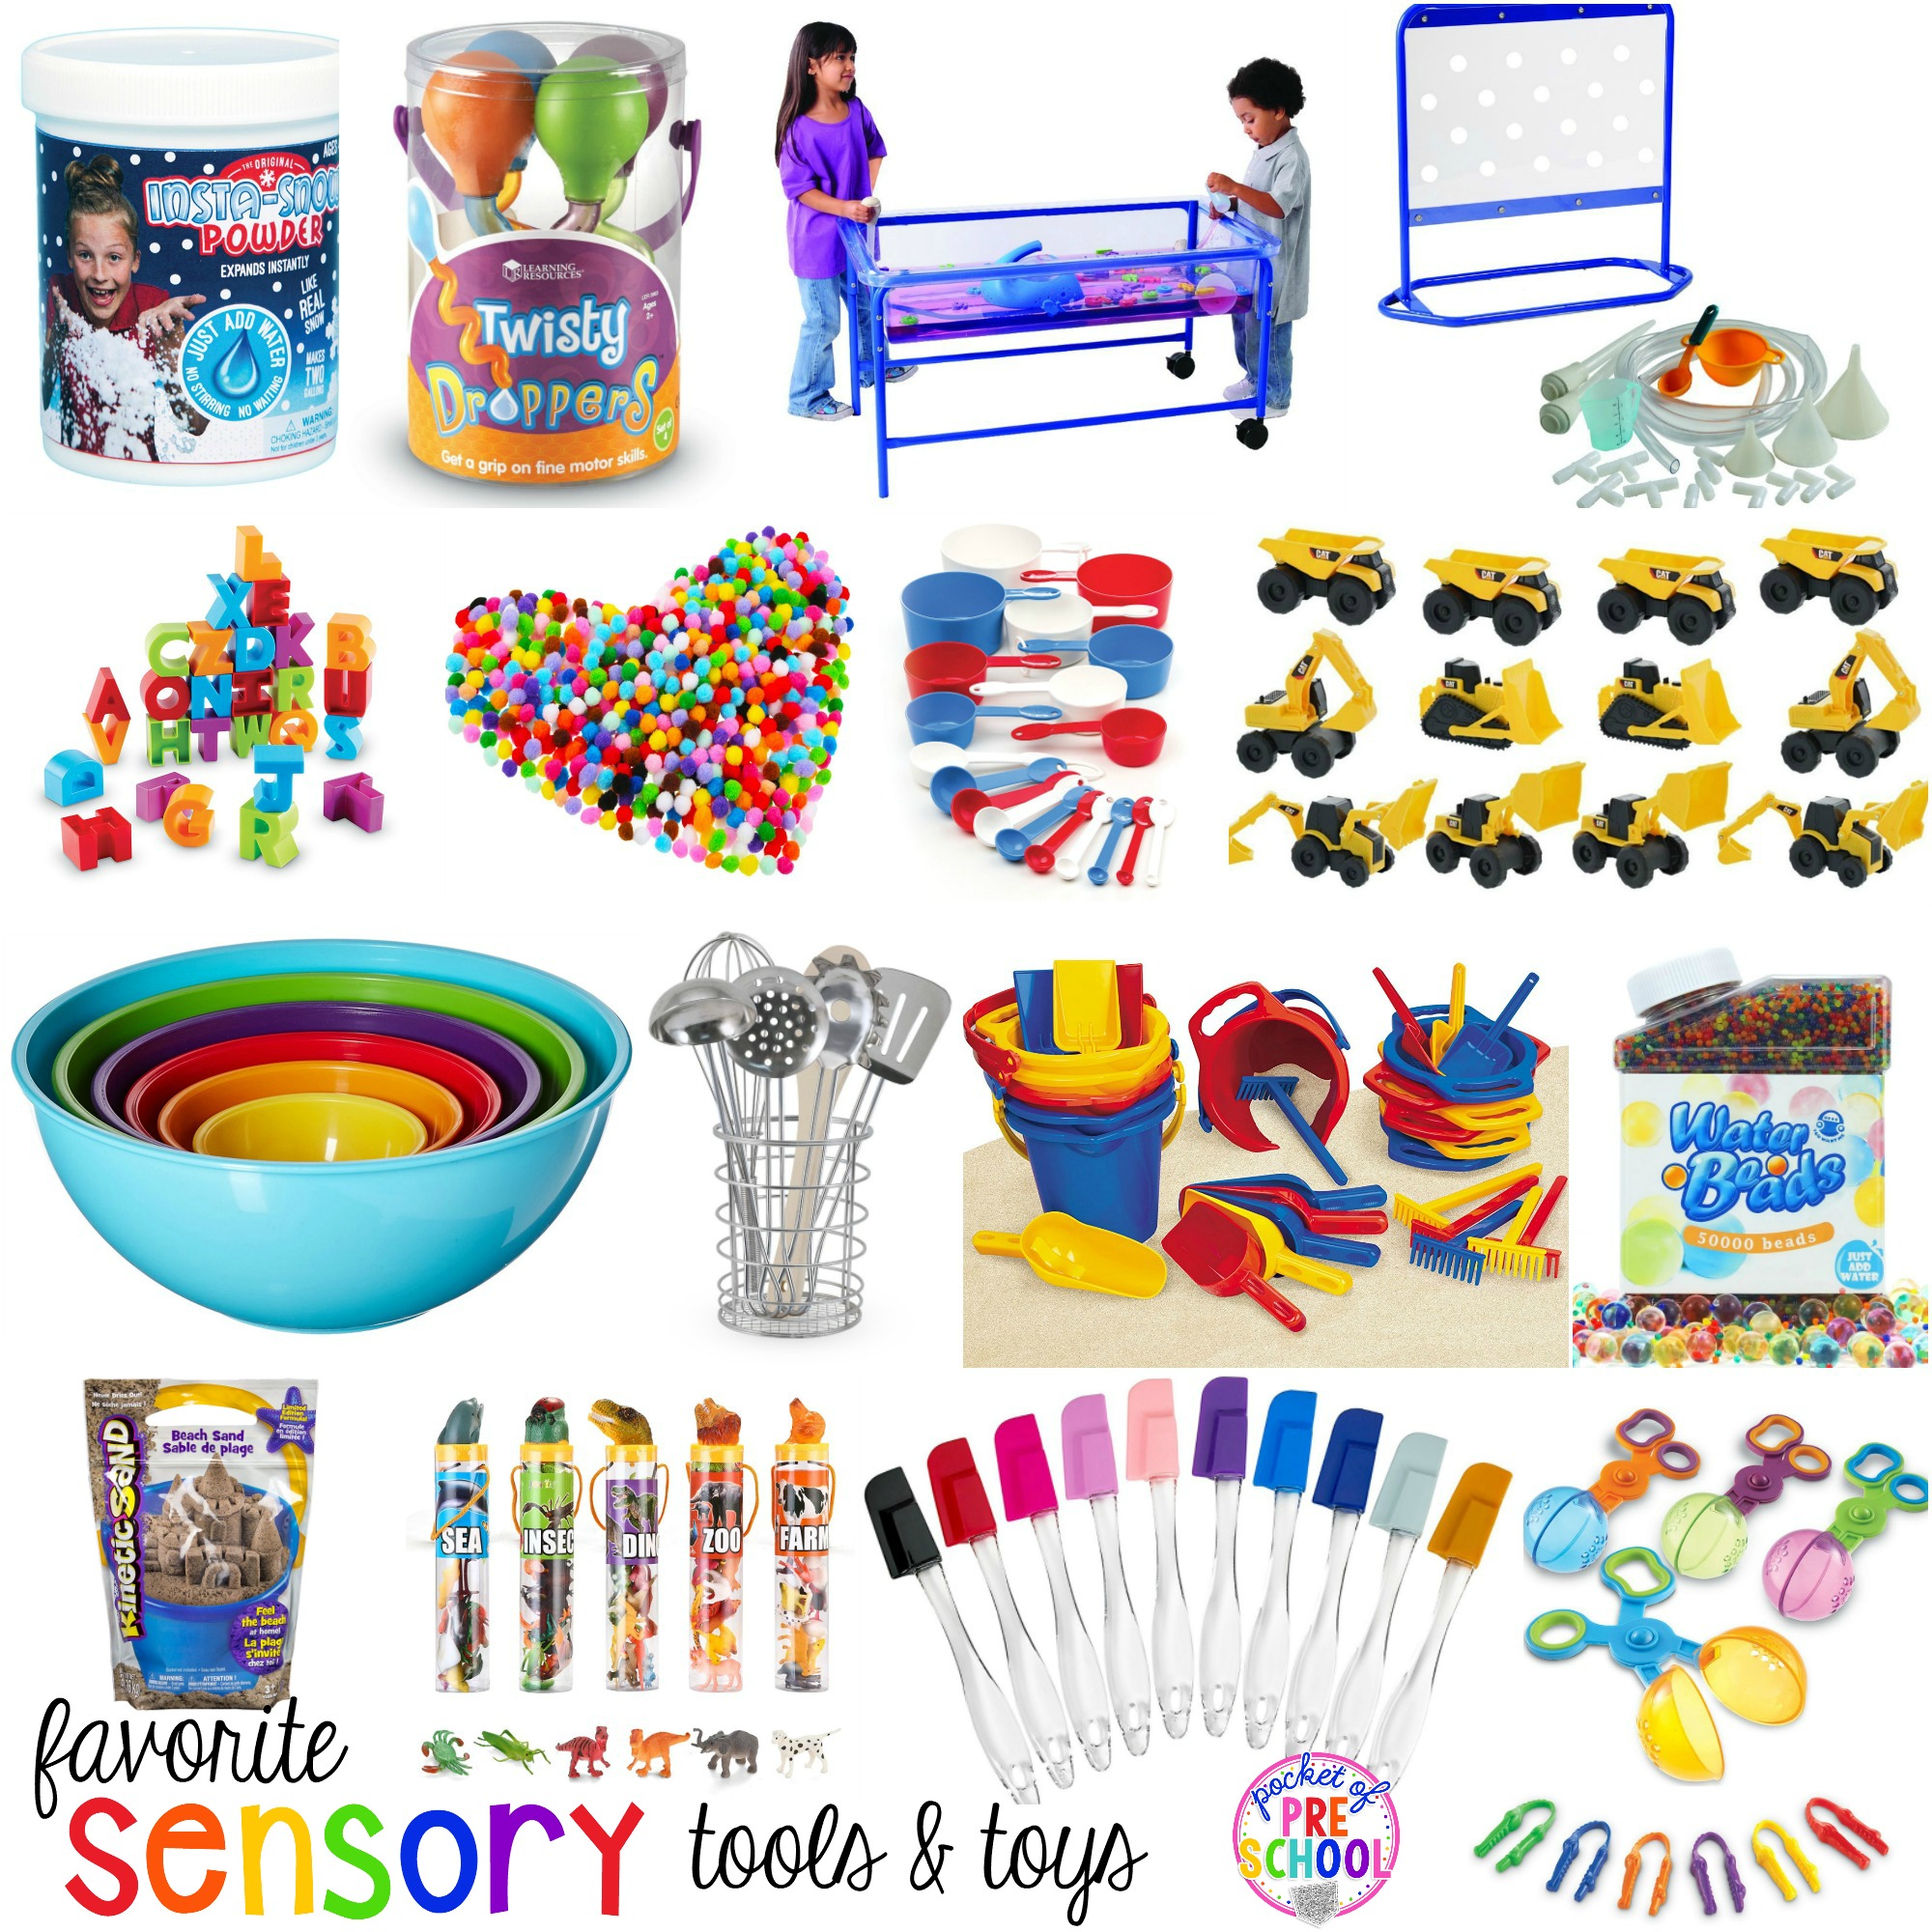 My Favorite Sensory Table Tools and Toys perfect for Preschool and Kindergarten classrooms to build to teach important math, science, and literacy concepts and skills as well as strengthen those fine motor muscles too.